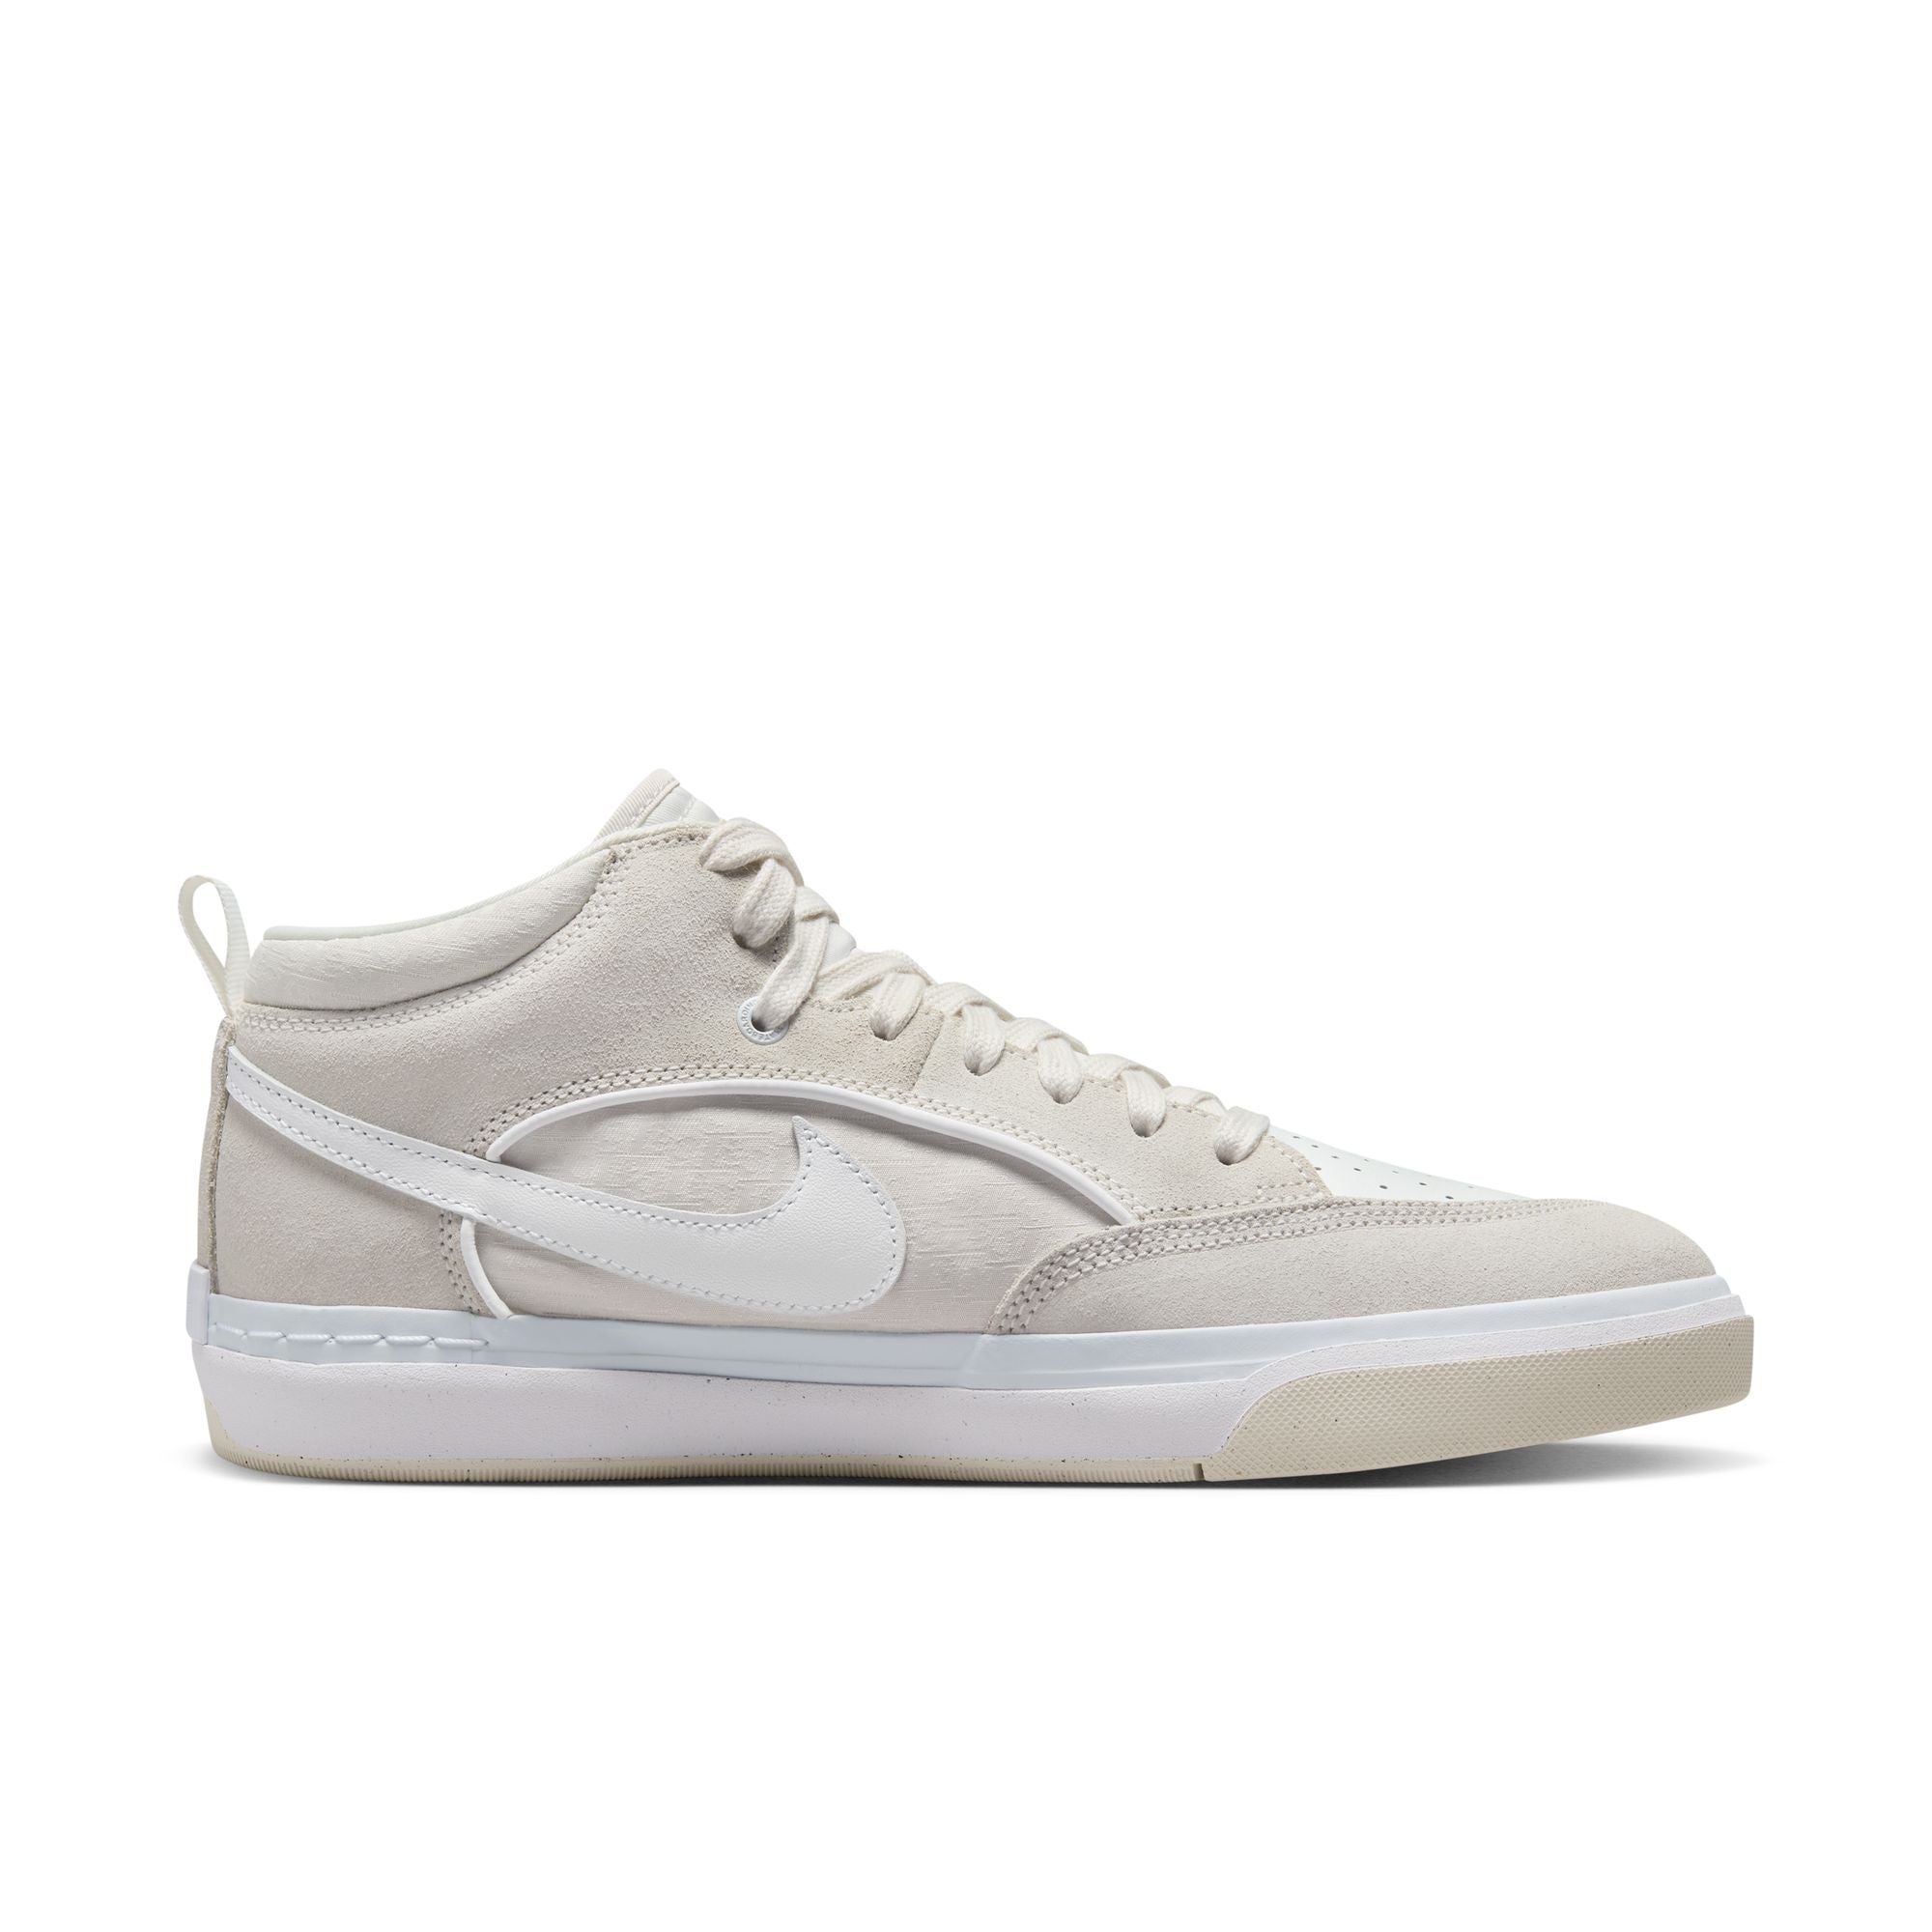 Cream white nike sb Leo Baker react mid top shoes with cream soles and white and cream details. Free uk shipping over £50